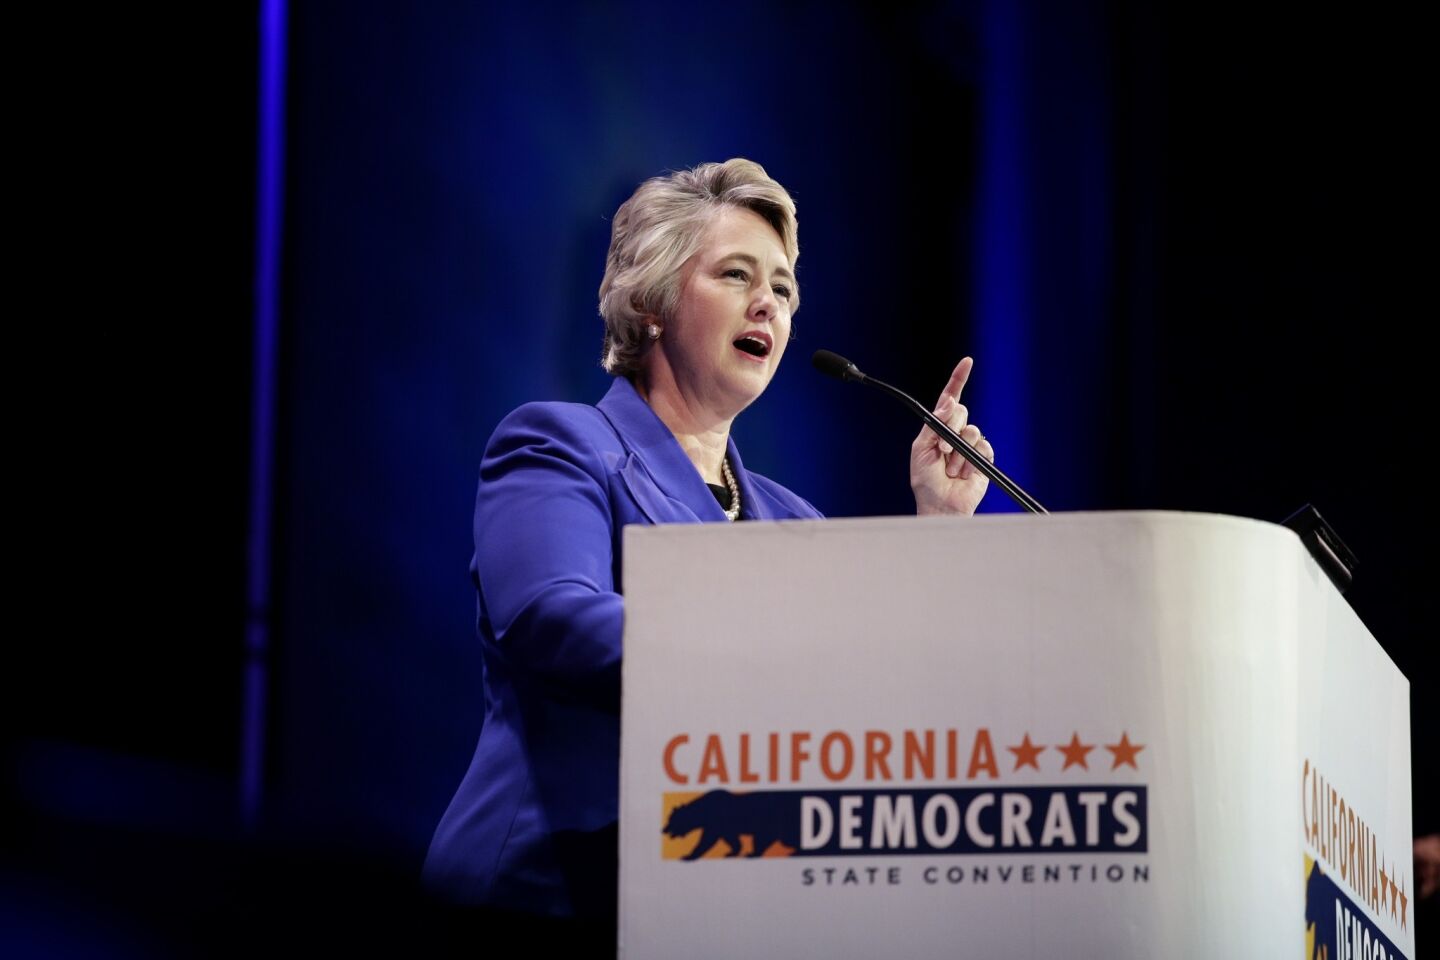 Houston Mayor Annise Parker speaks during a general session at the California Democrats State Convention on Saturday.